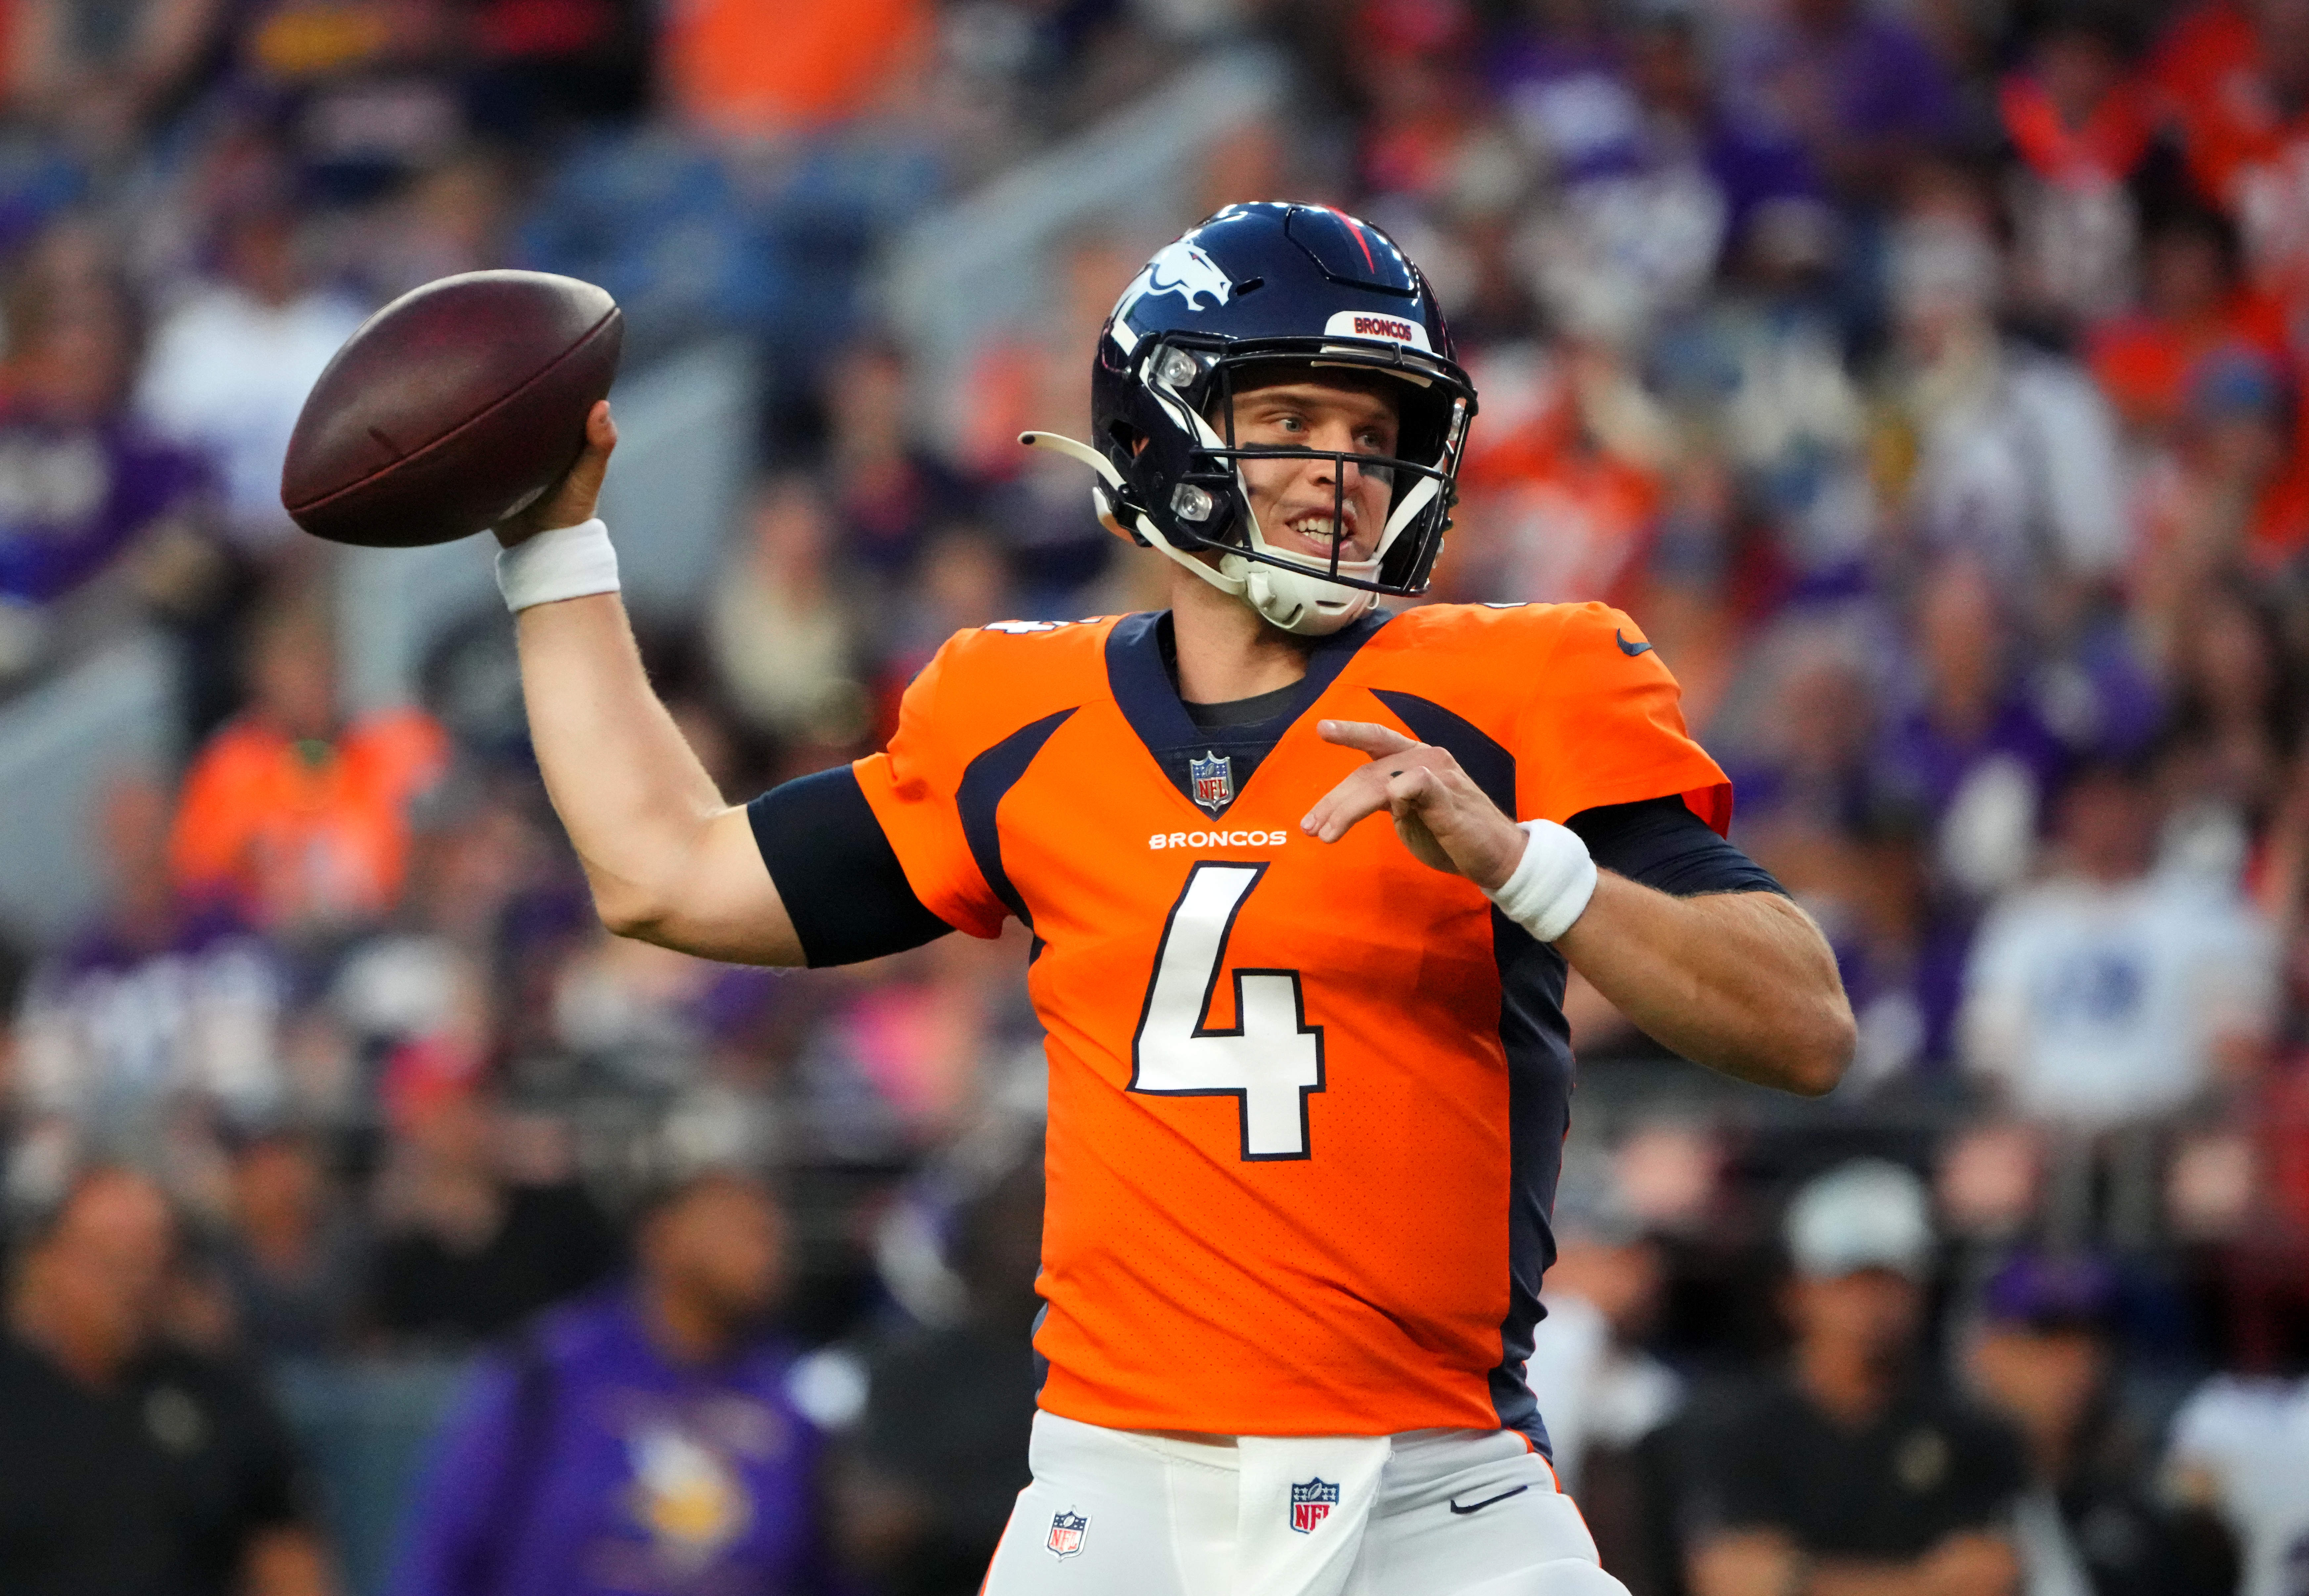 Denver Broncos quarterback Brett Rypien (4) prepares to pass the ball the ball in the first quarter against the Minnesota Vikings at Empower Field at Mile High.